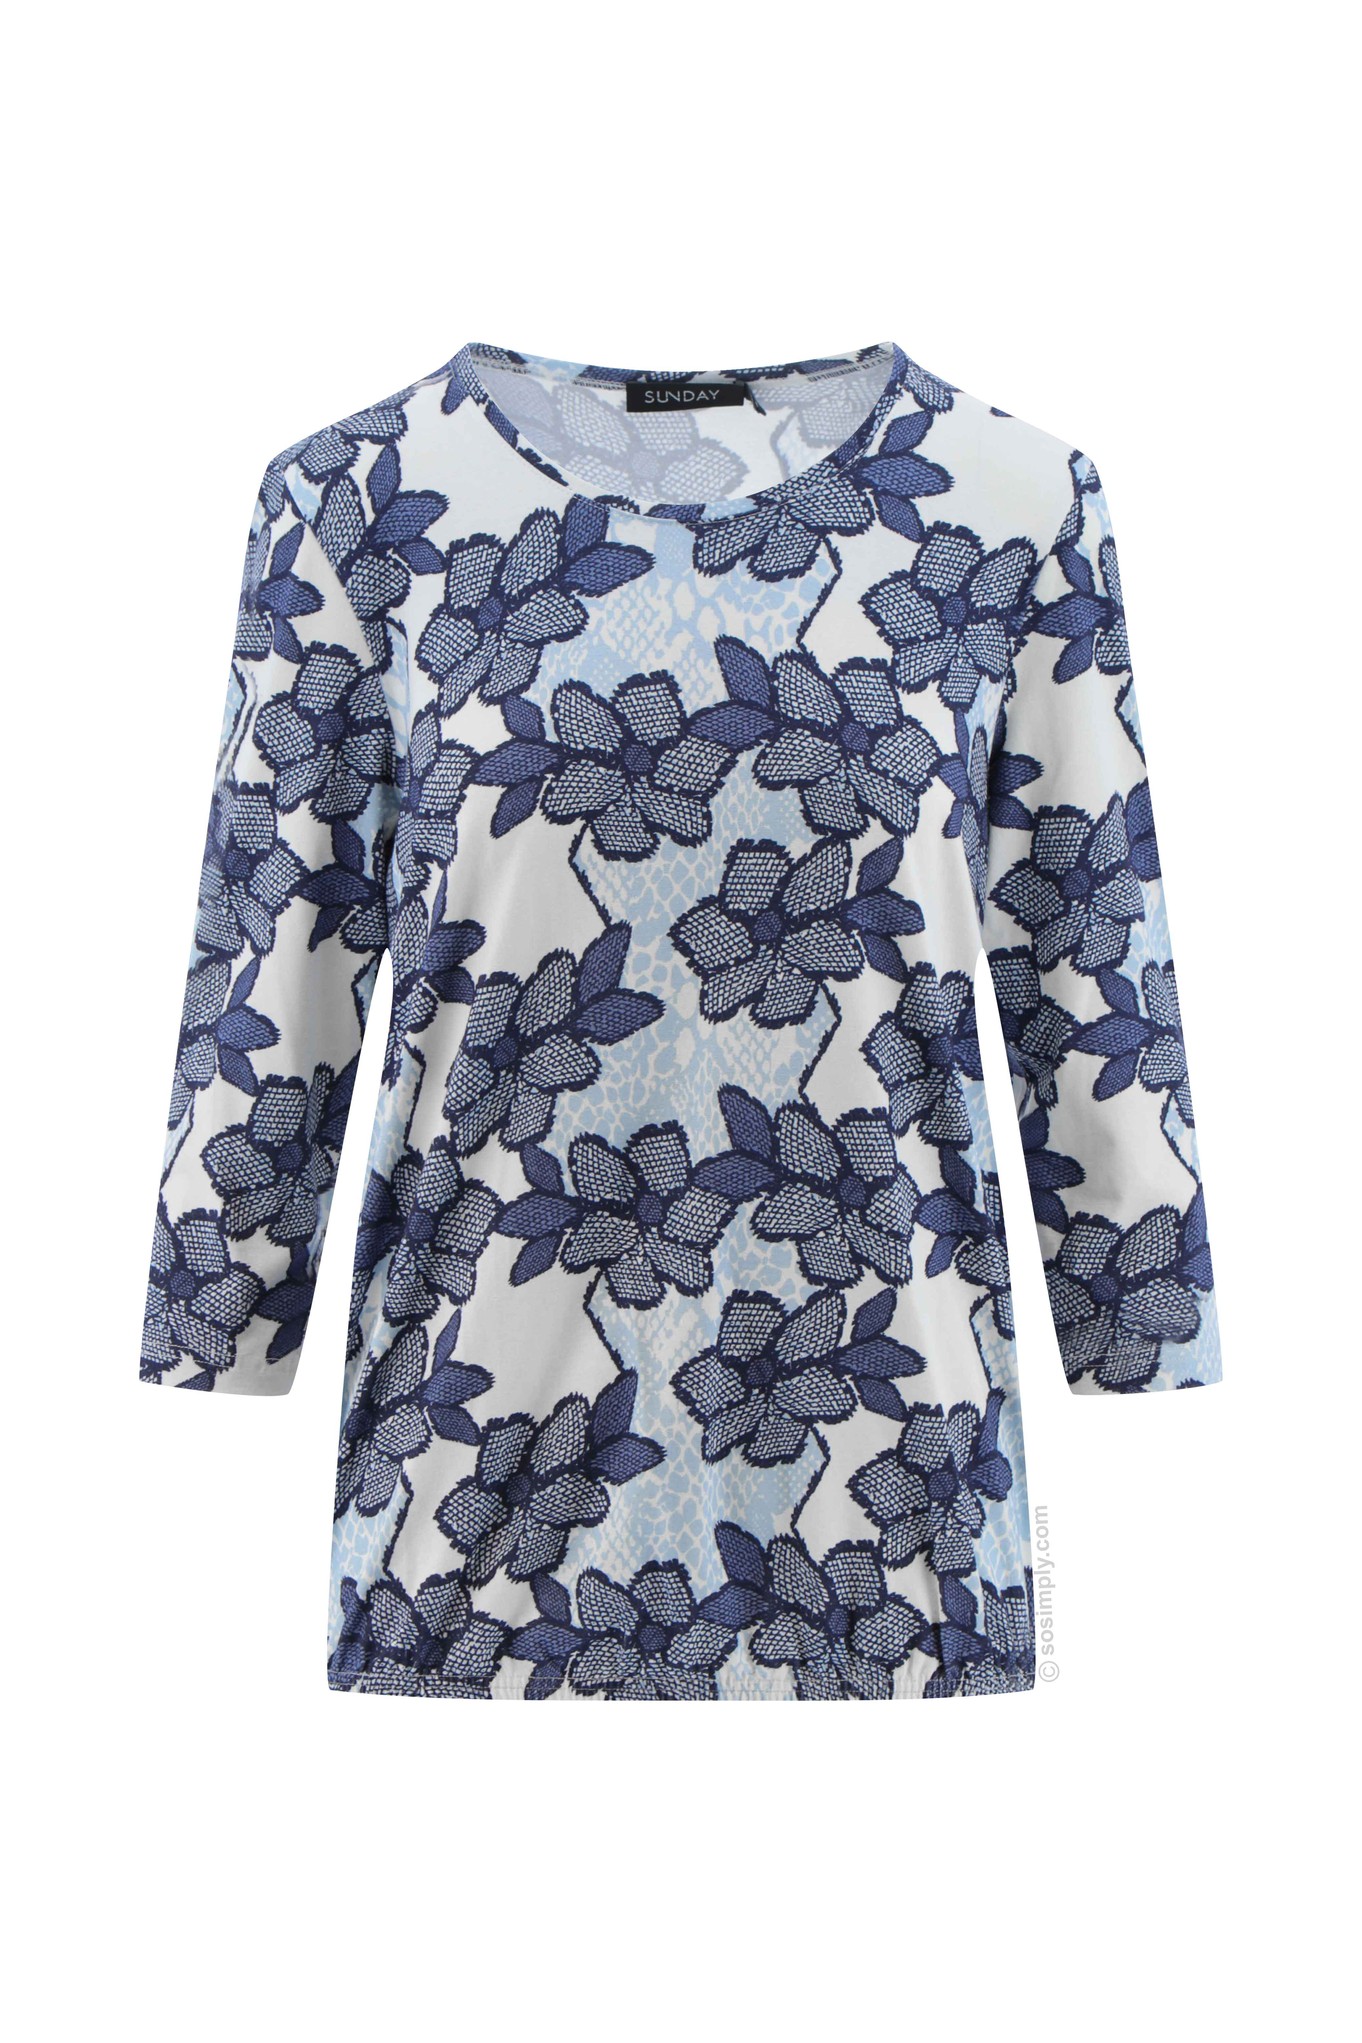 Sunday Delilah Printed Top